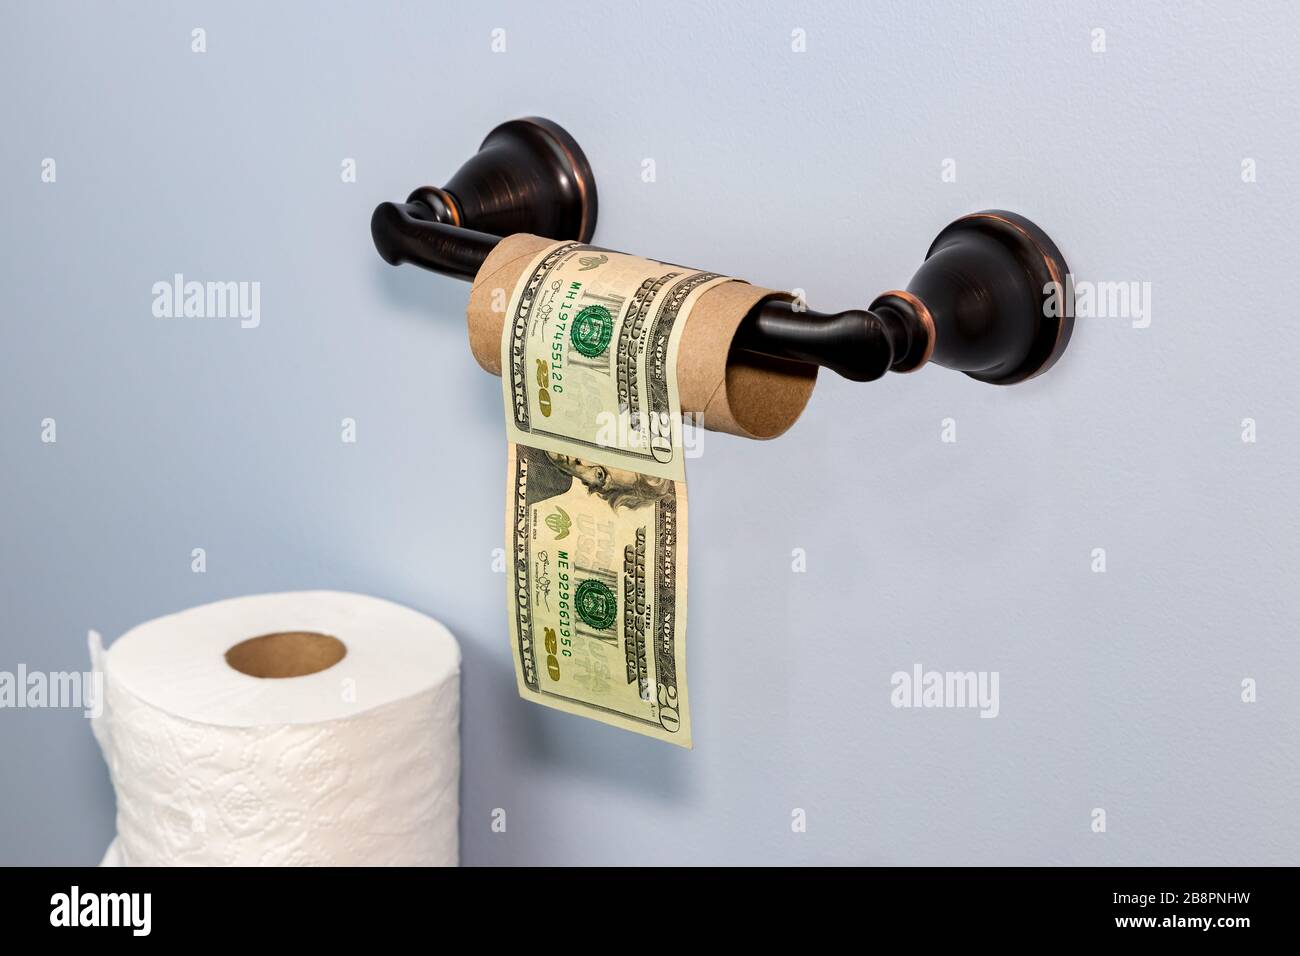 Empty toilet paper roll wrapped in 20 dollar bills. Concept of supply shortage, hoarding, price gouging during Covid-19 coronavirus worldwide pandemic Stock Photo